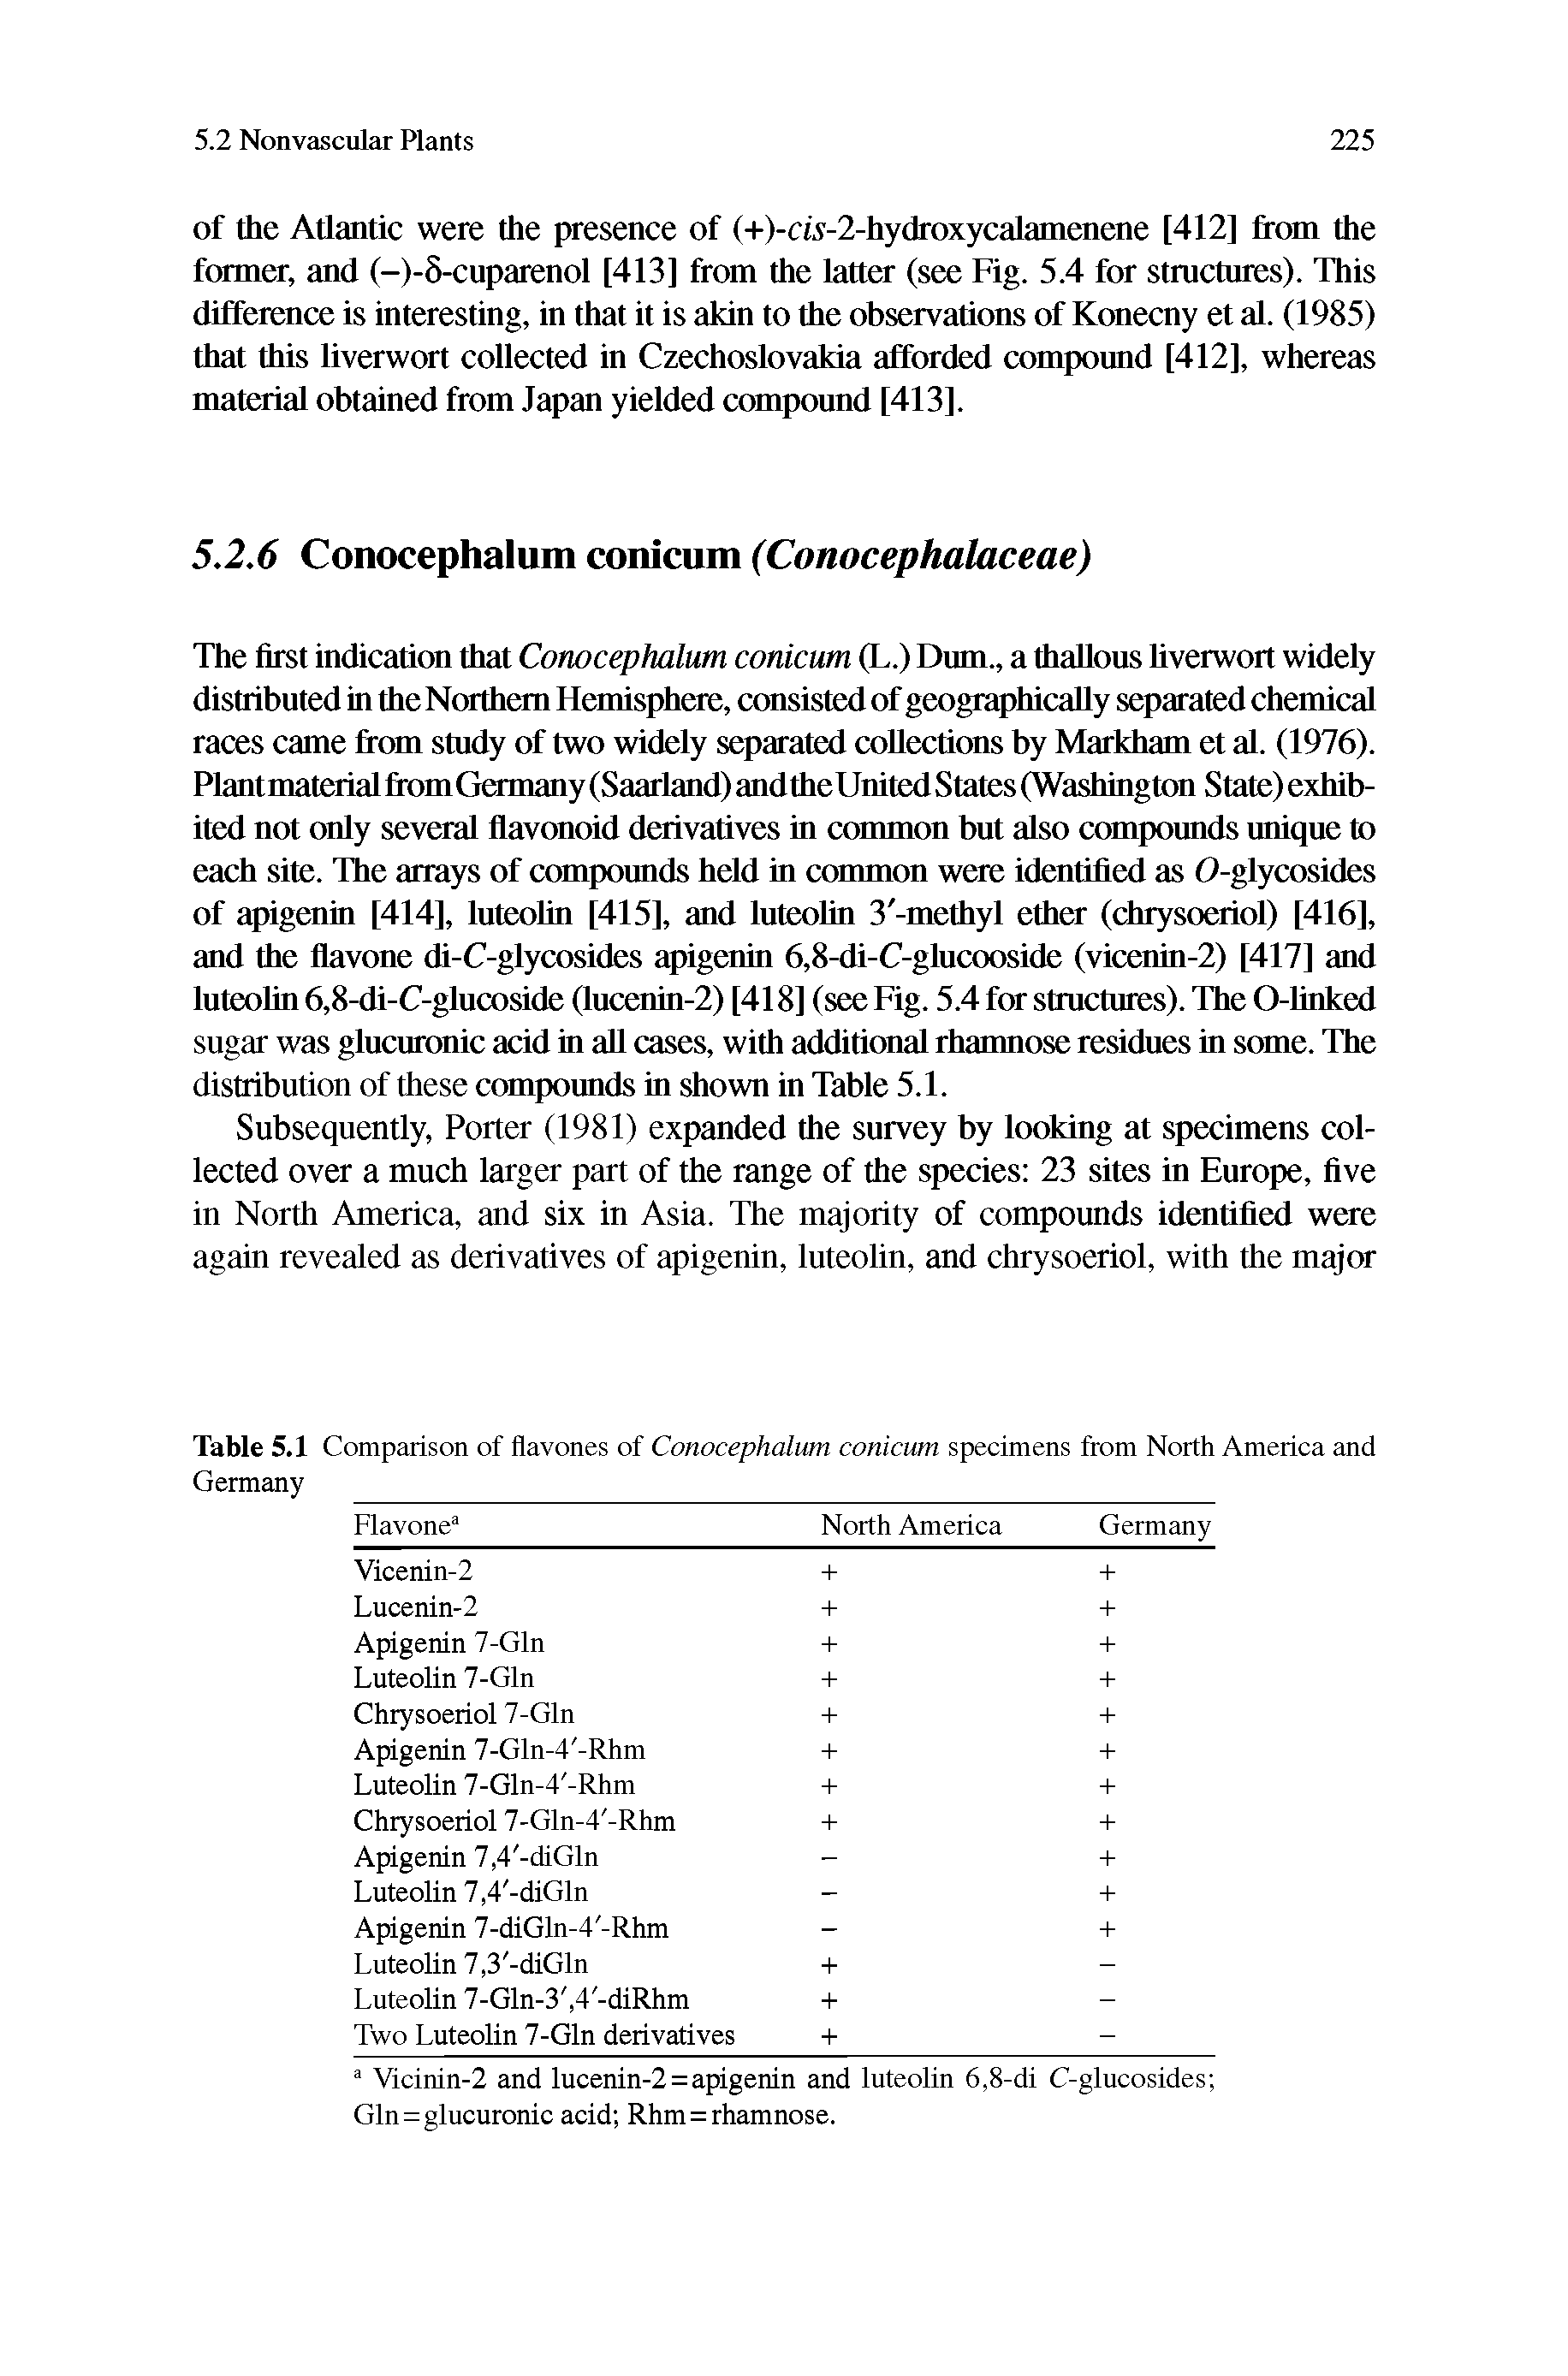 Table 5.1 Comparison of flavones of Conocephalum conicum specimens from North America and Germany...